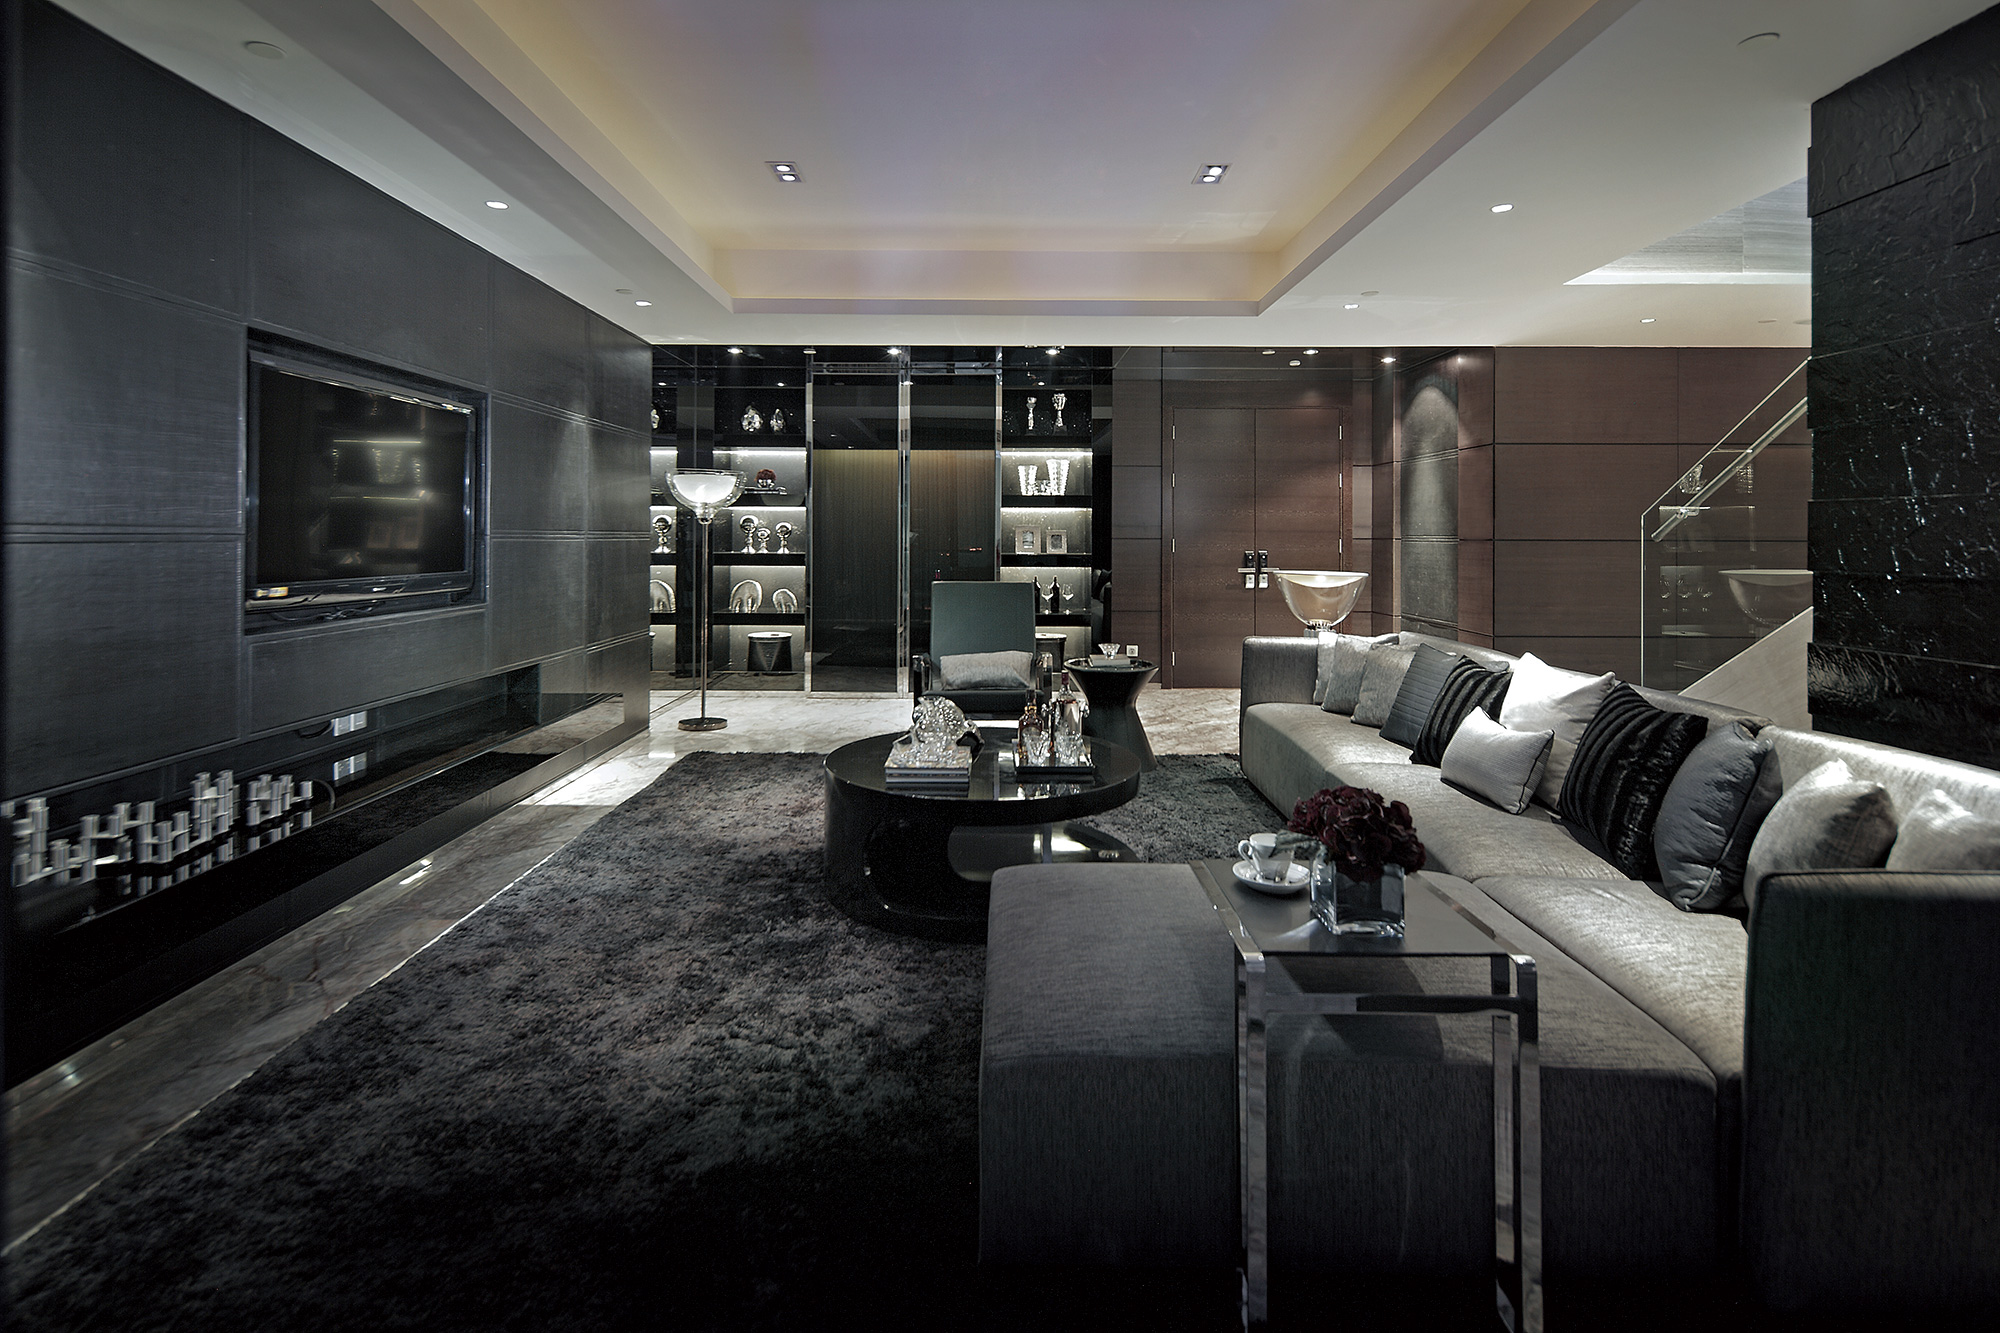 Luxurious design ideas for living room "width =" 2000 "height =" 1333 "srcset =" https://mileray.com/wp-content/uploads/2020/05/1588515488_616_Trendy-Living-Room-Designs-That-Demonstrate-Stylish-and-Modern-Decor.jpg 2000w, https: / /mileray.com/wp-content/uploads/2016/05/Steve-Leung-1-2-300x200.jpg 300w, https://mileray.com/wp-content/uploads/2016/05/Steve-Leung - 1-2-768x512.jpg 768w, https://mileray.com/wp-content/uploads/2016/05/Steve-Leung-1-2-1024x682.jpg 1024w, https://mileray.com/wp - content / uploads / 2016/05 / Steve-Leung-1-2-696x464.jpg 696w, https://mileray.com/wp-content/uploads/2016/05/Steve-Leung-1-2-1068x712. jpg 1068w, https://mileray.com/wp-content/uploads/2016/05/Steve-Leung-1-2-630x420.jpg 630w "sizes =" (maximum width: 2000px) 100vw, 2000px